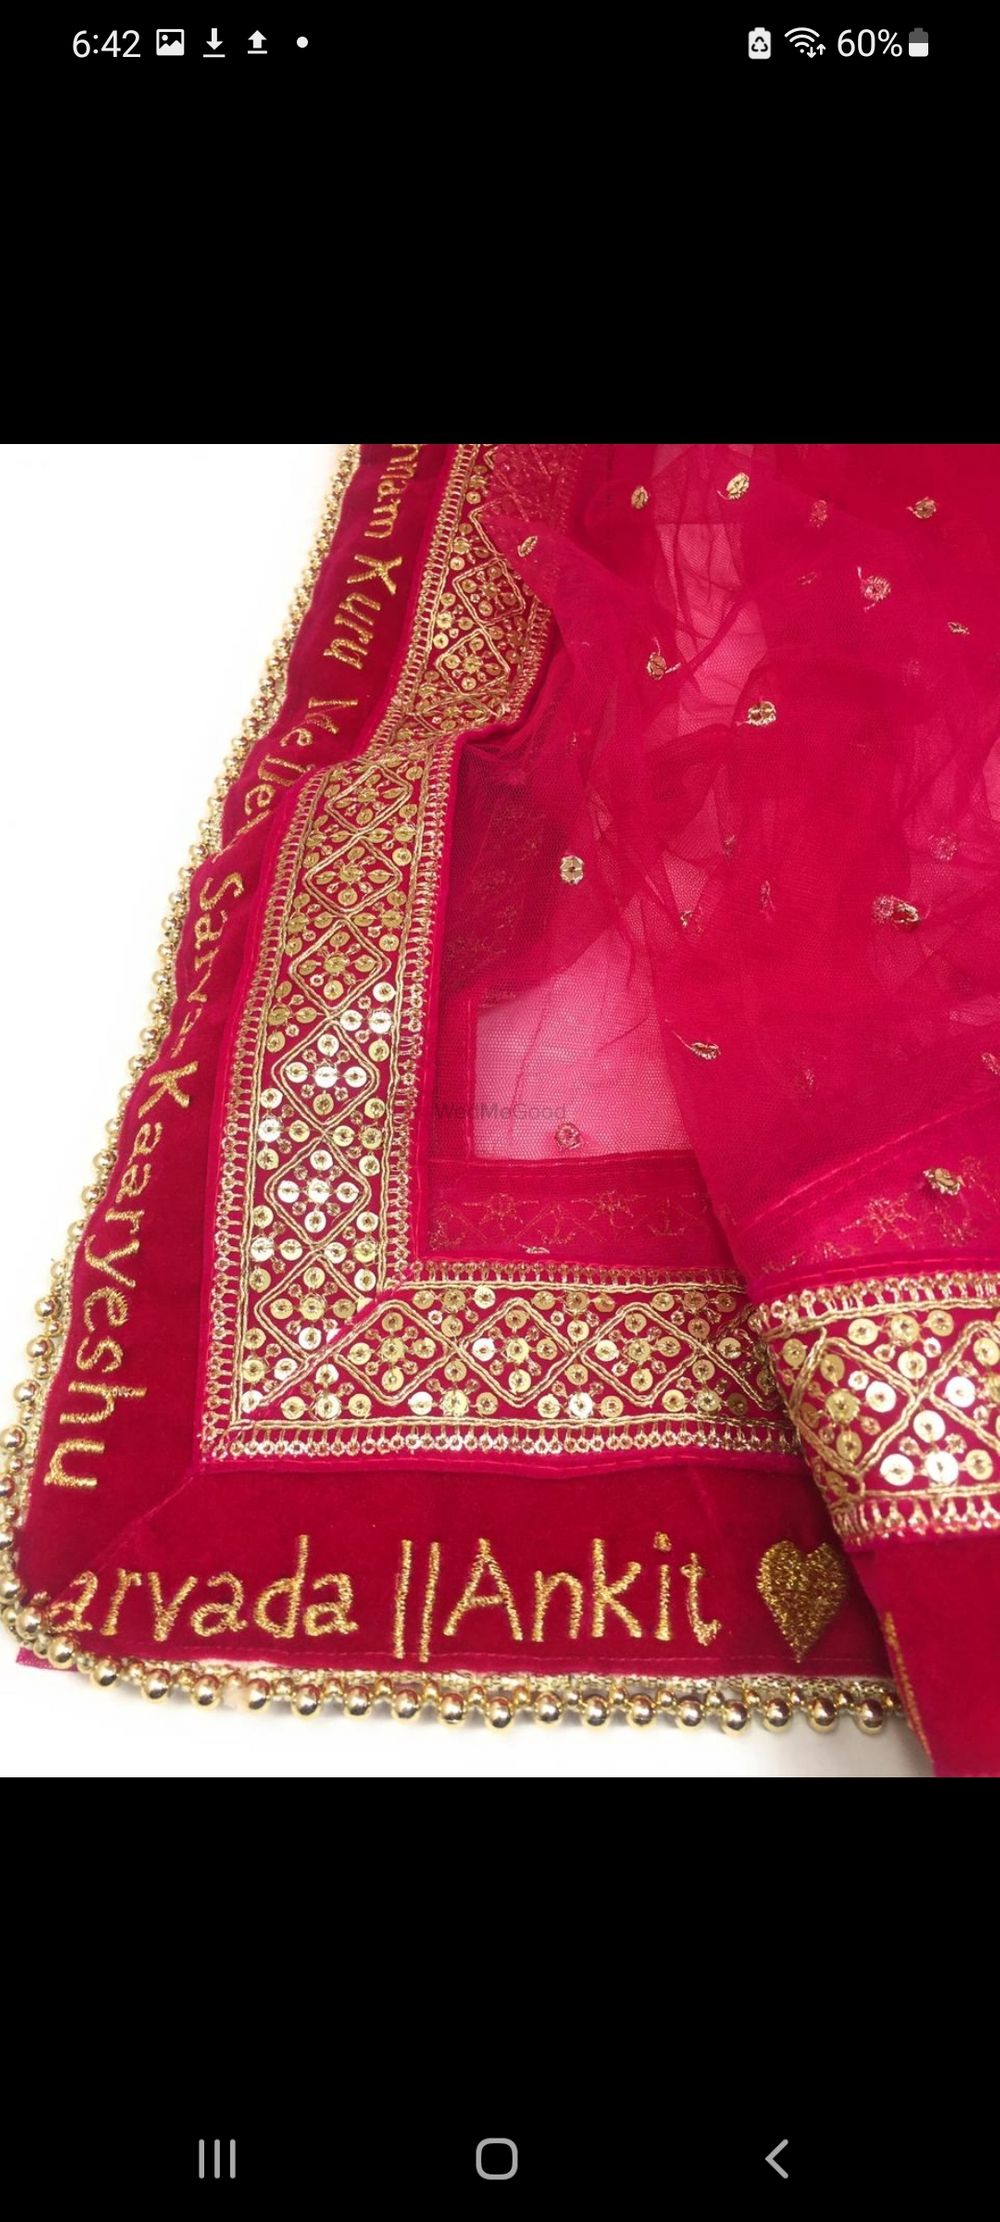 Photo From Customized Accessories i e Dupatta, latkan,earrings, gifts - By Beauty Blends Bridal Reflection